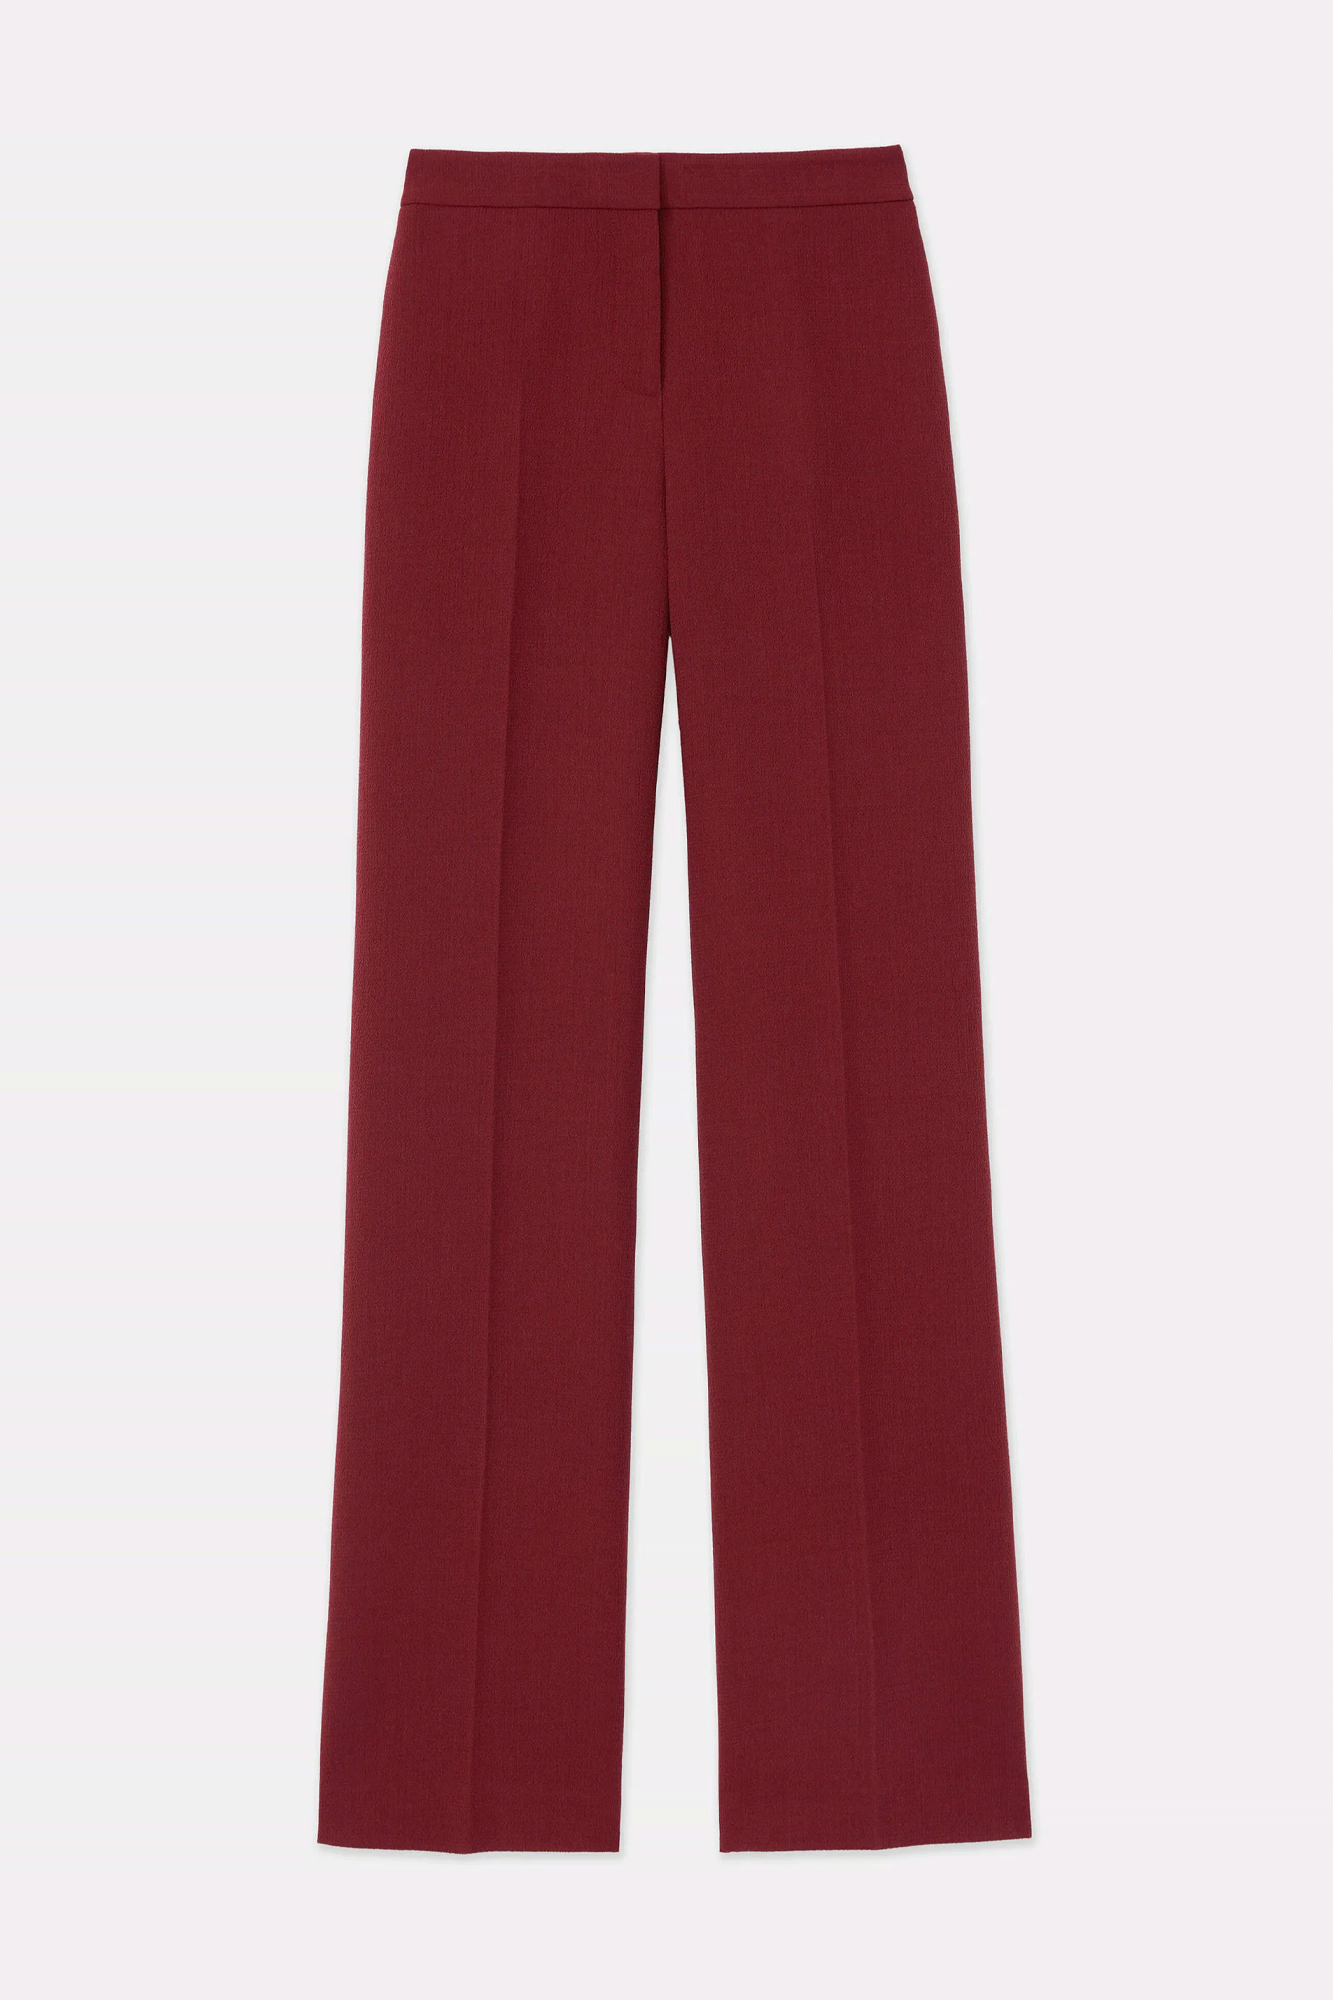 The Dalton Wide Leg Pant from Lafayette 148 is a great addition to any wardrobe. Crafted from Finesse Crepe material, this piece offers a structured and substantial fit for ultimate comfort. Finished with a hook & eye closure and seam pockets for a clean front, the full length design ensures all-day versatility.